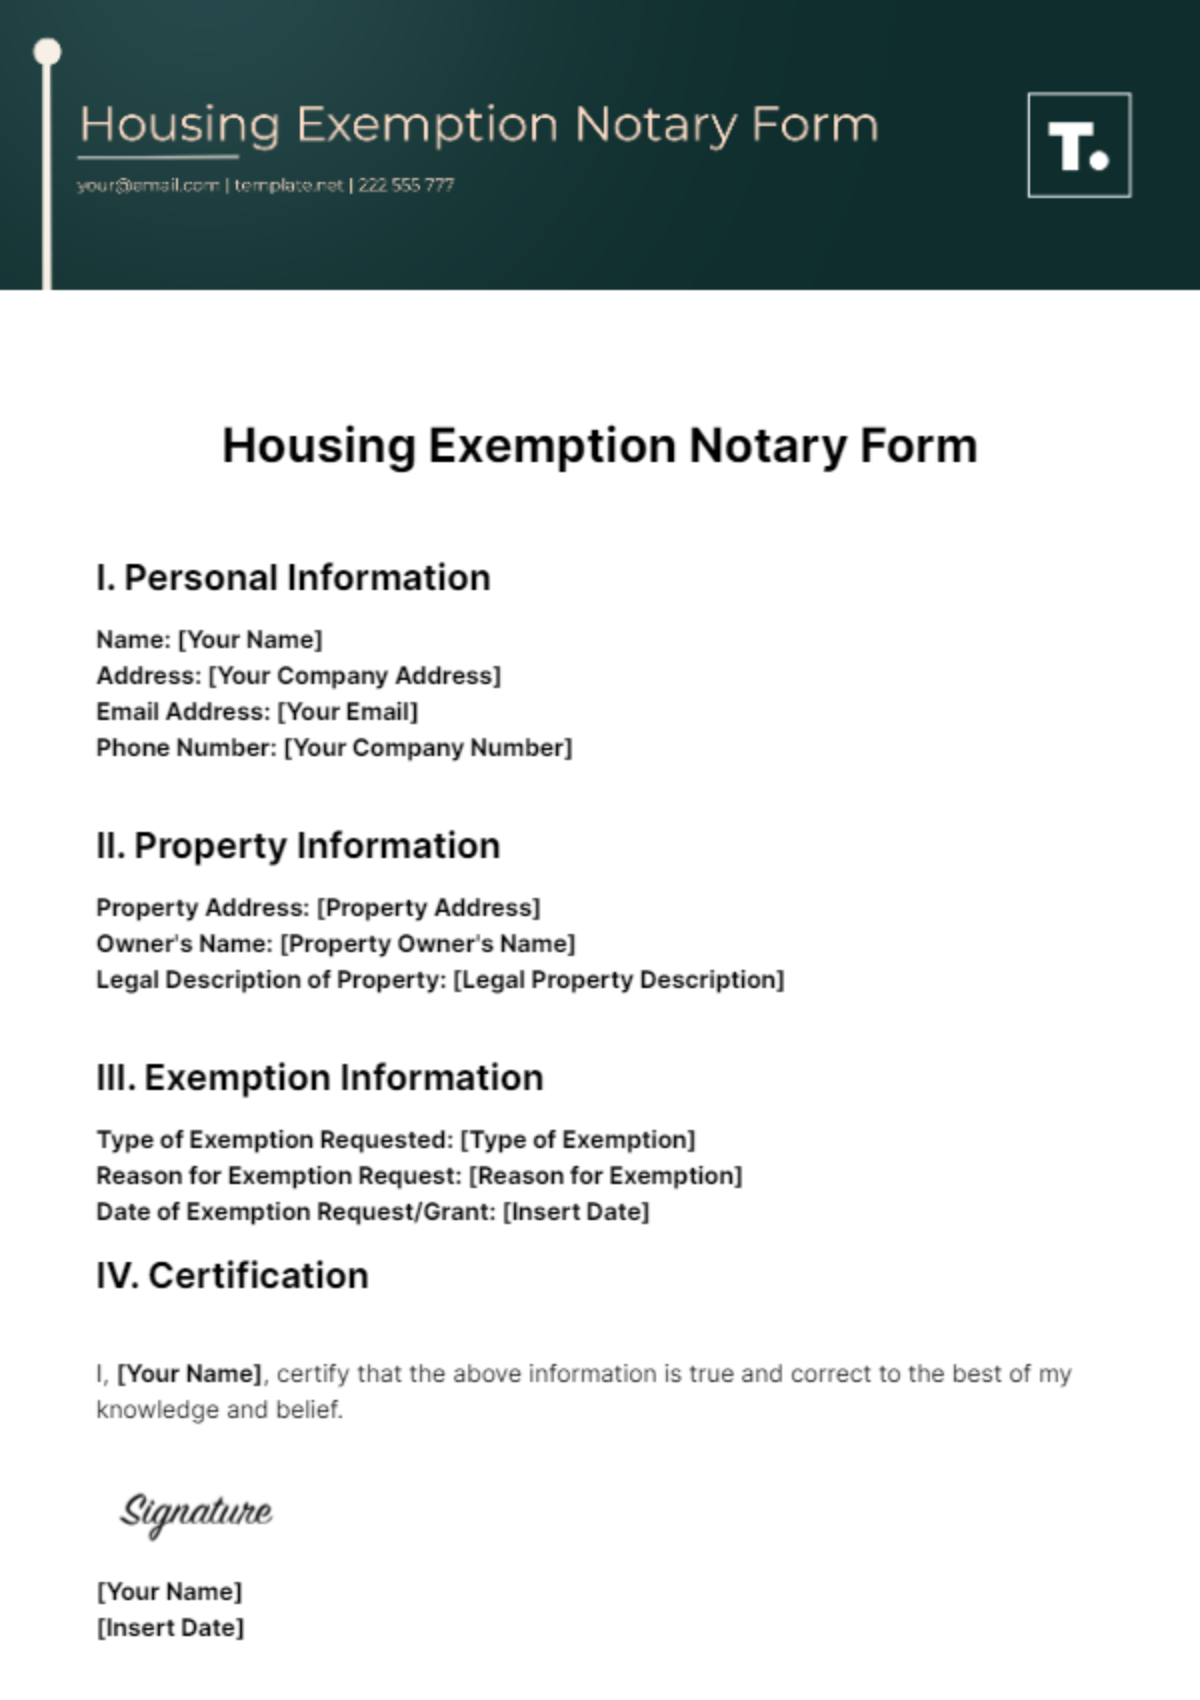 Housing Exemption Notary Form Template